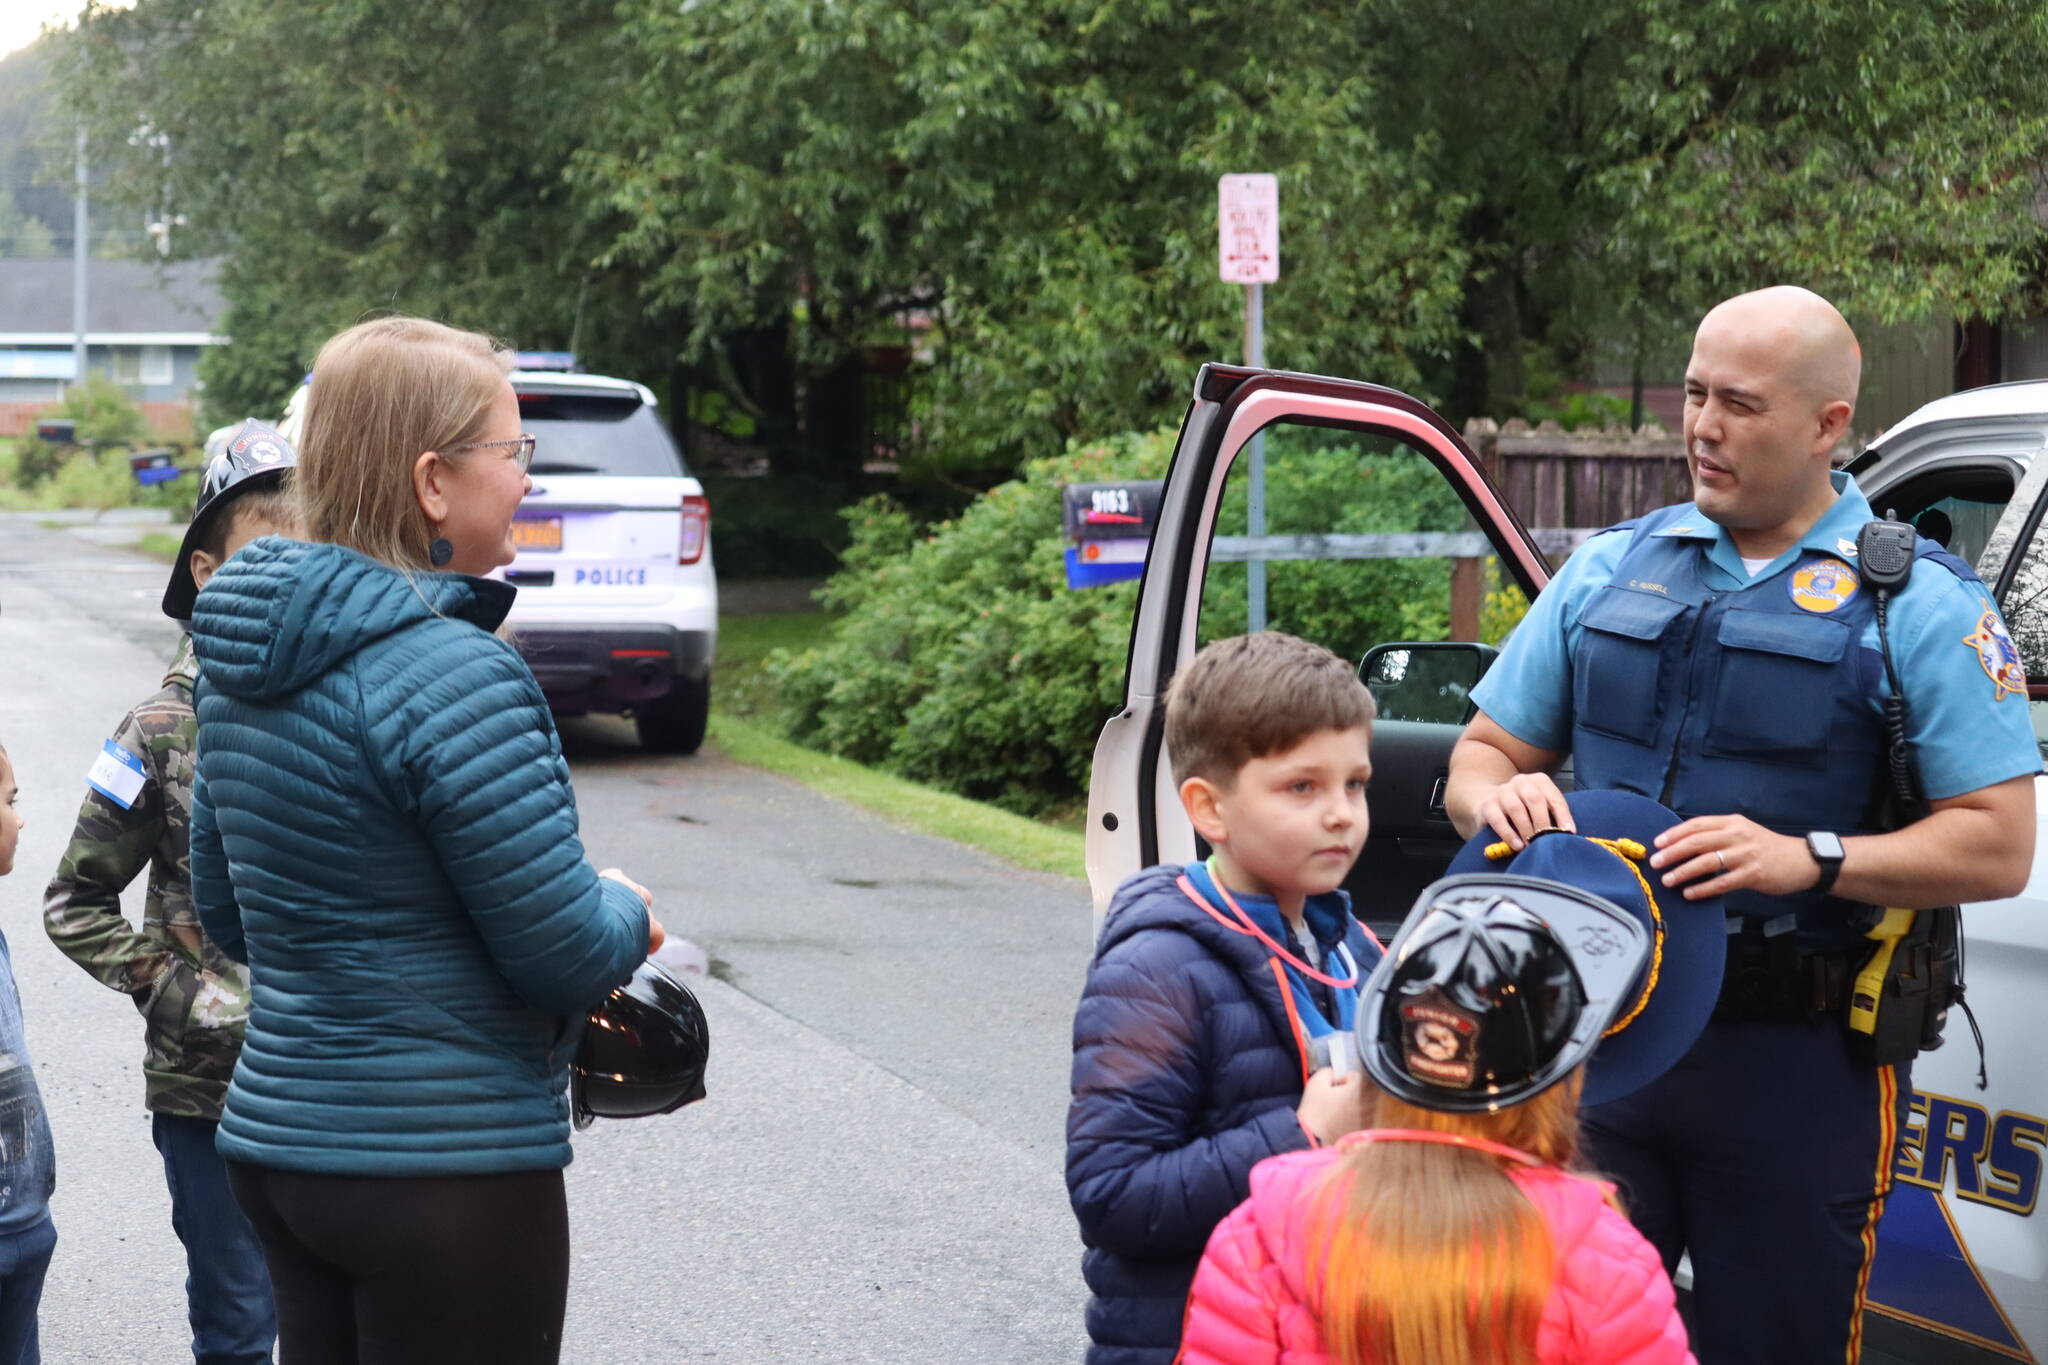 Alaska State Trooper Sgt. Chris Russell spoke with Valentina Gouk and others from the Skywood Lane neighborhood while the kids got a chance to interact with his squad car. (Jonson Kuhn / Juneau Empire)